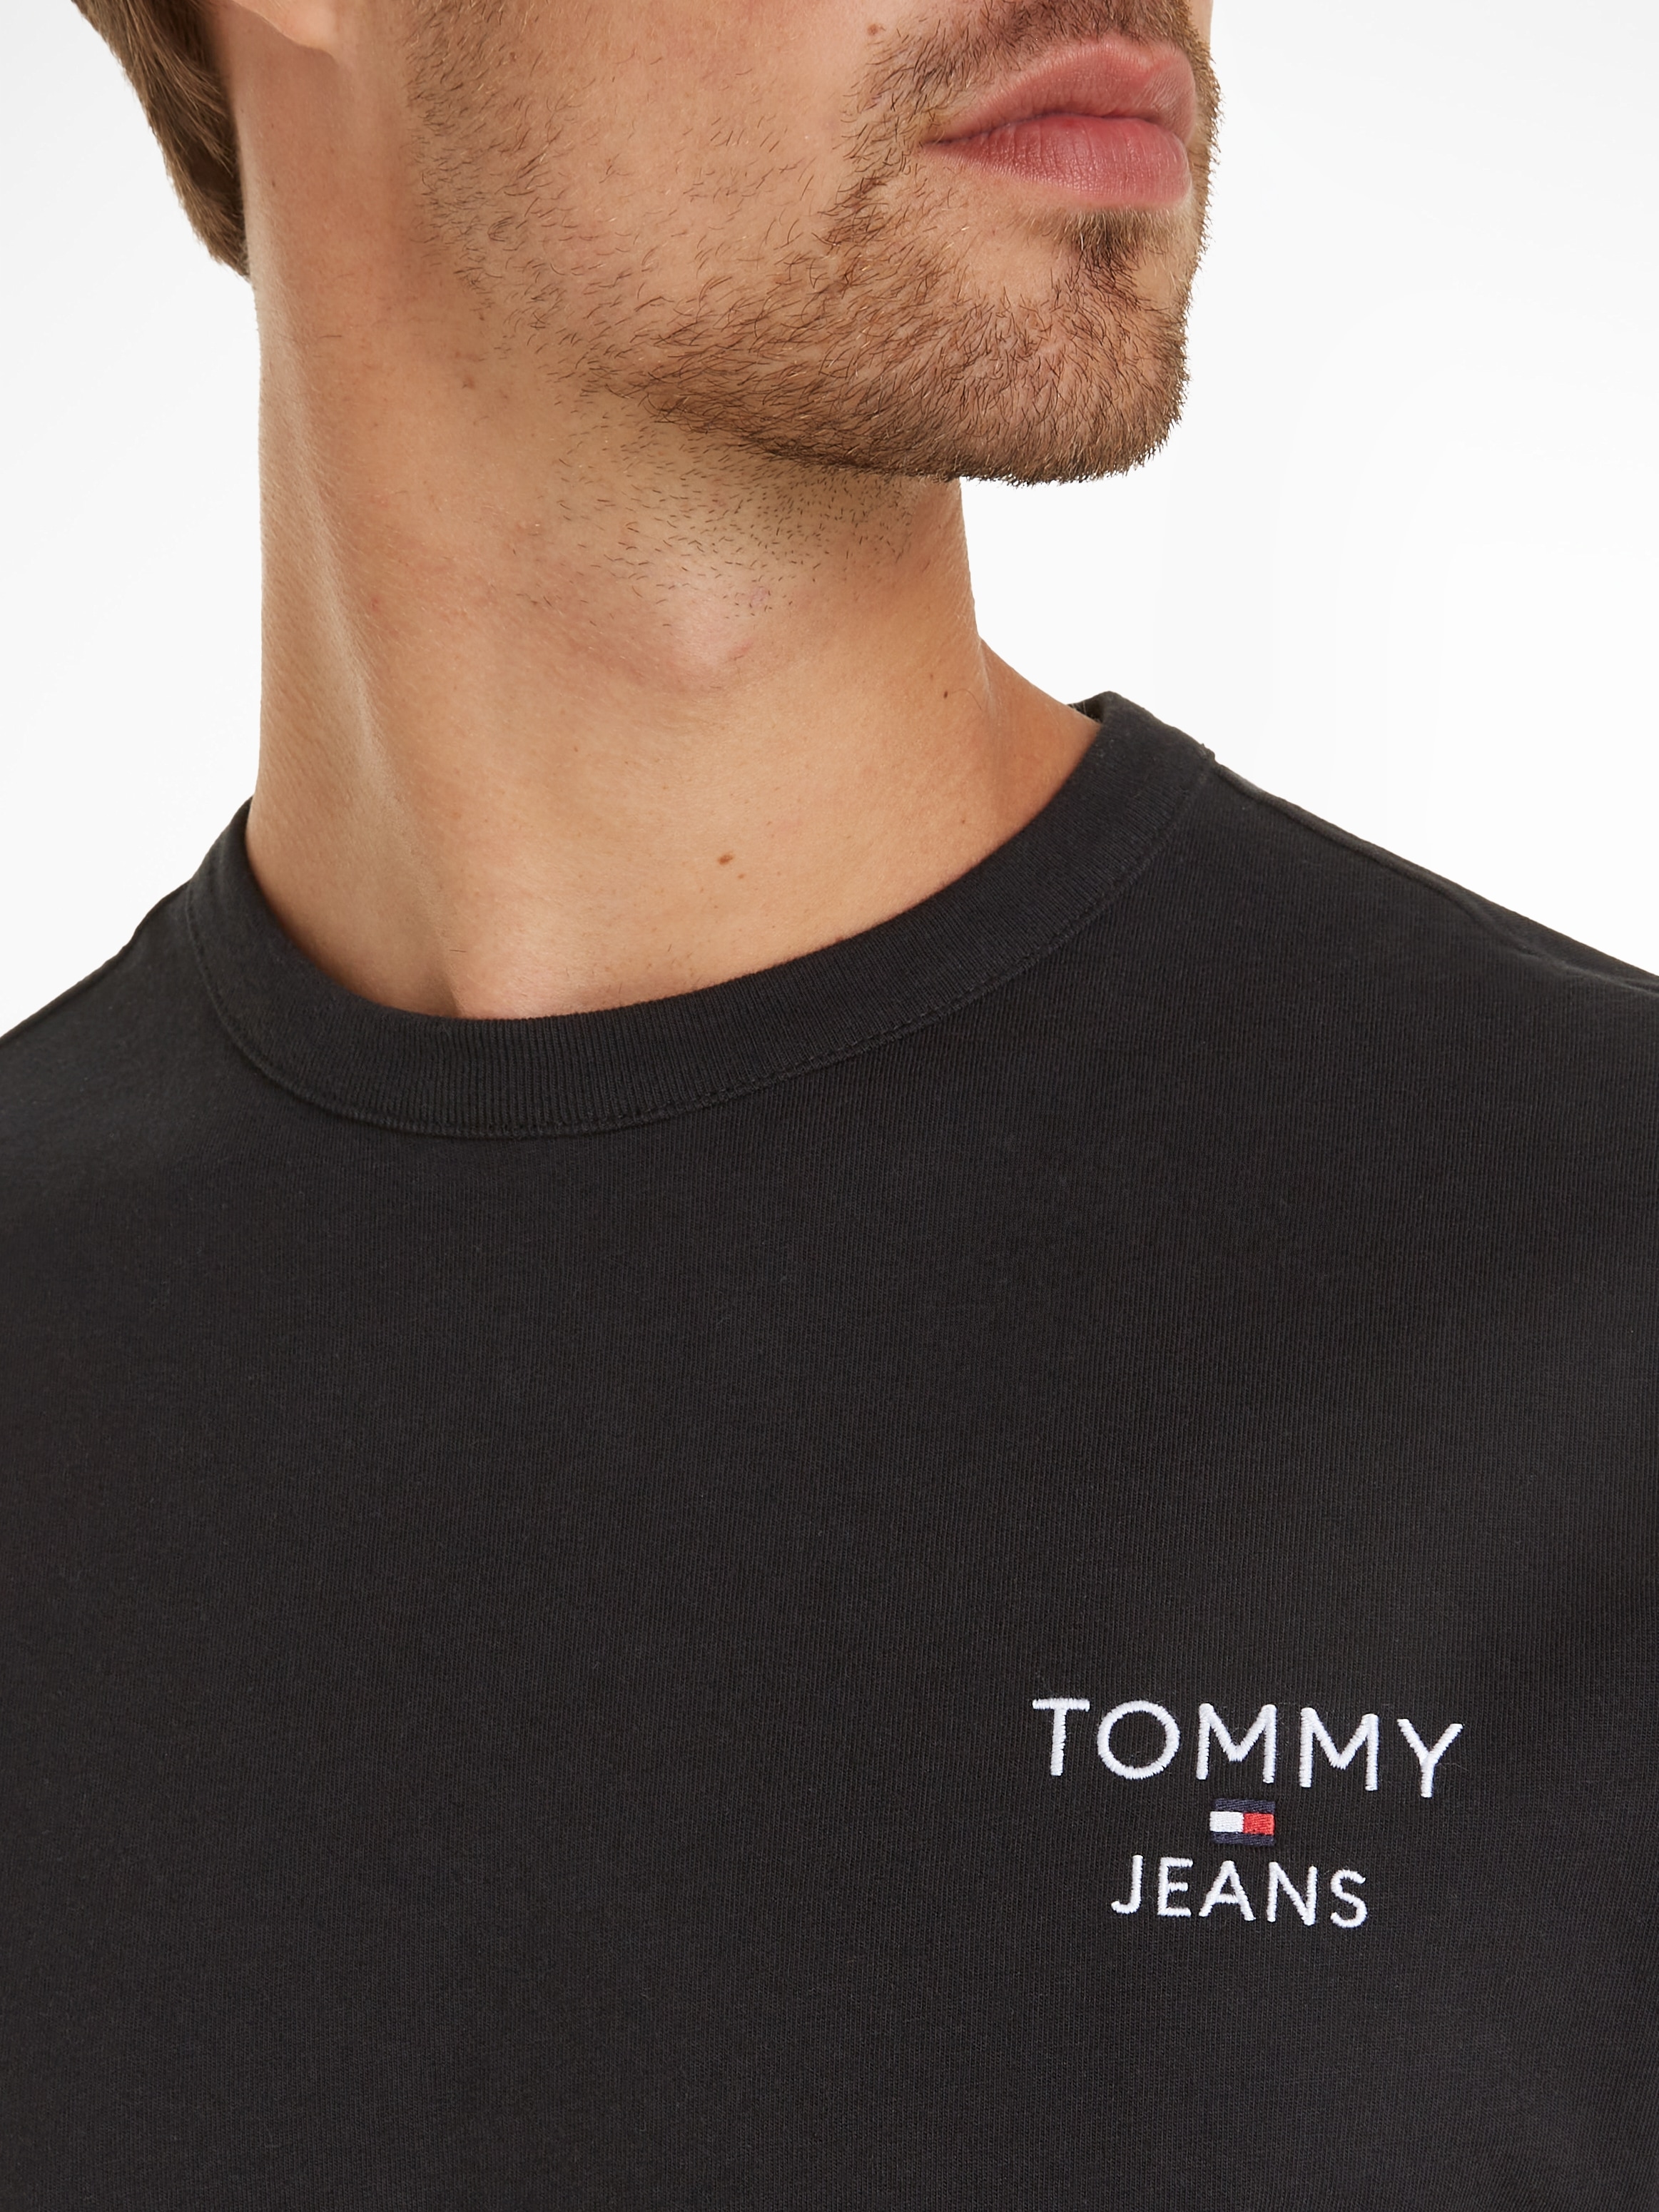 Tommy Jeans T-Shirt »TJM CORP TEE online EXT«, REG Tommy Jeans bei Stickerei mit